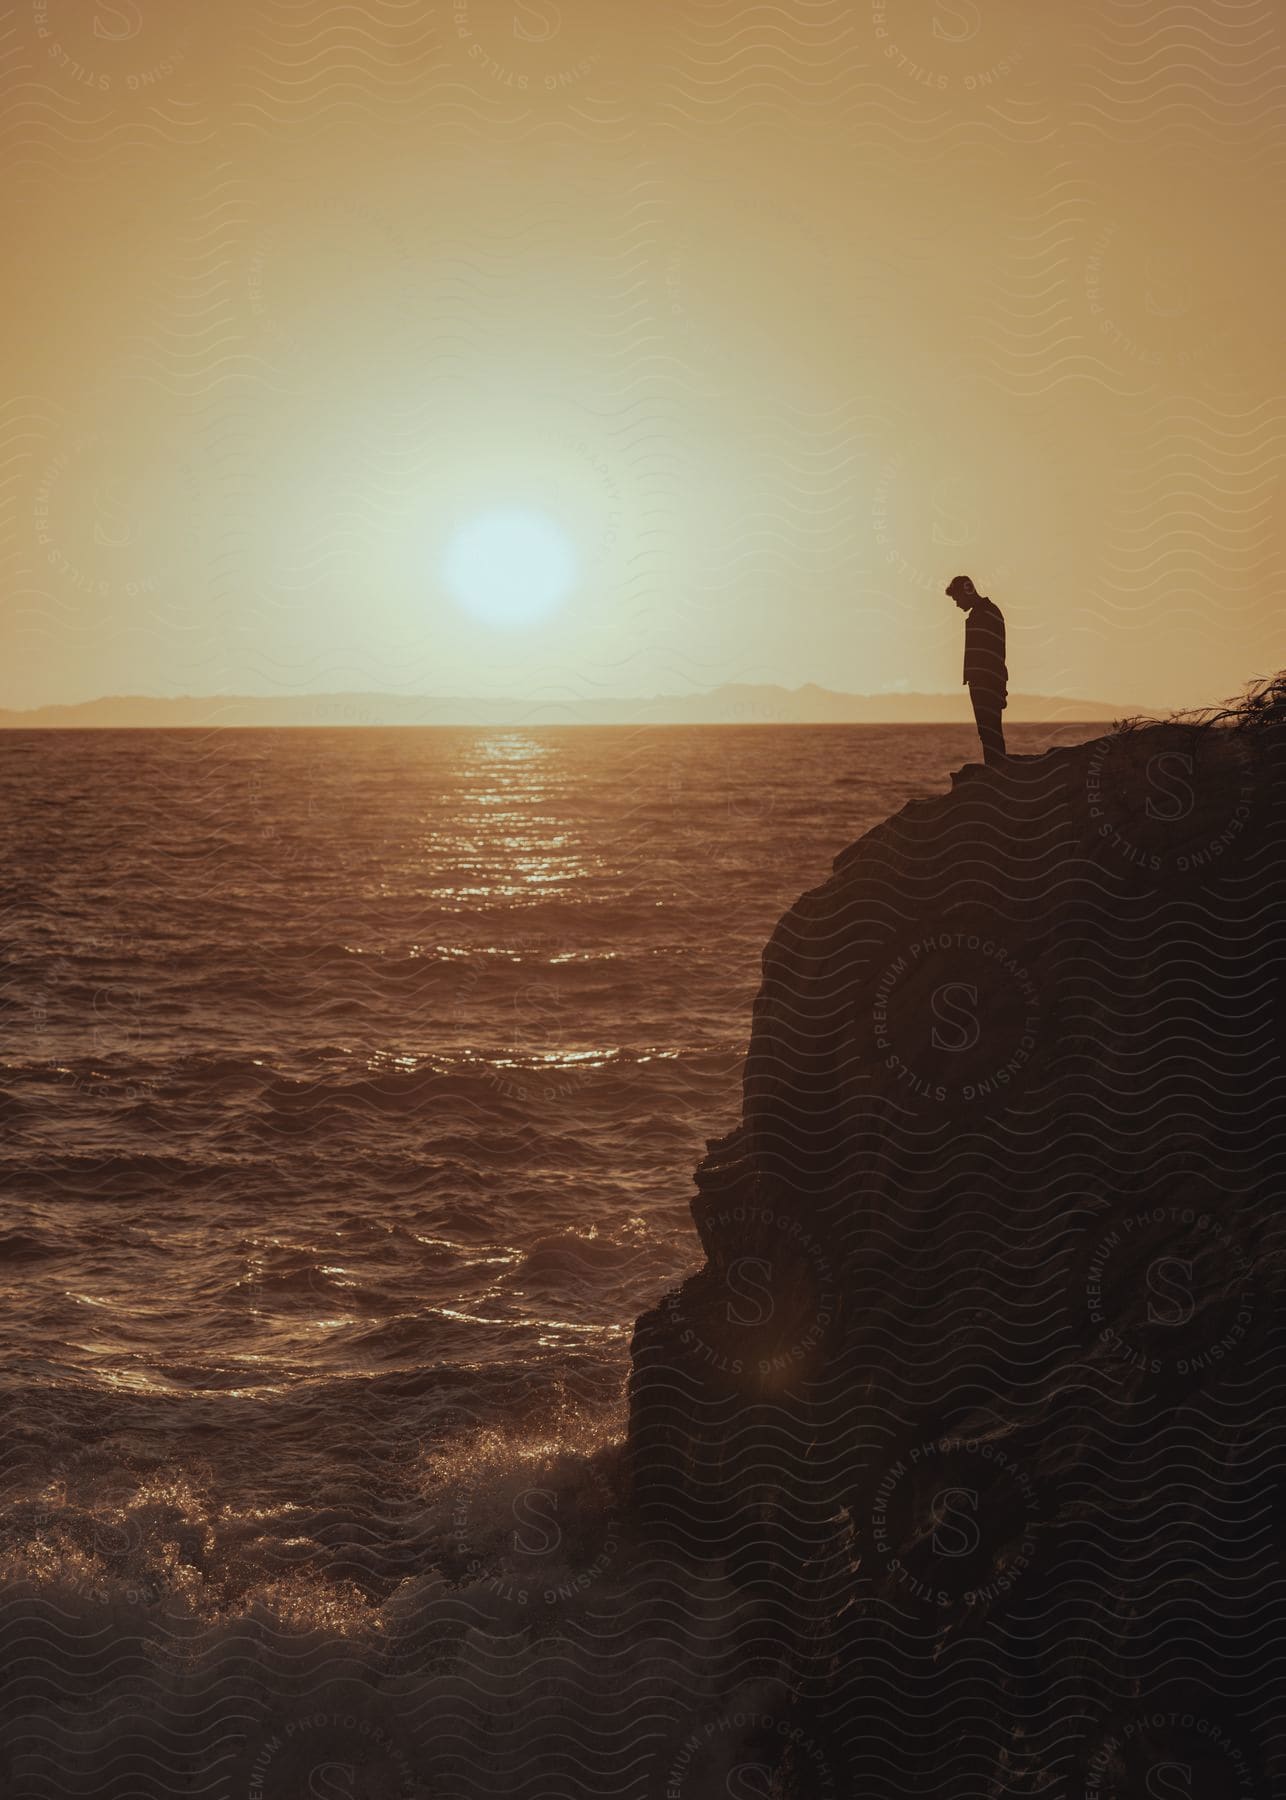 A man stands on a cliff overlooking violent waves crashing onto the shore below